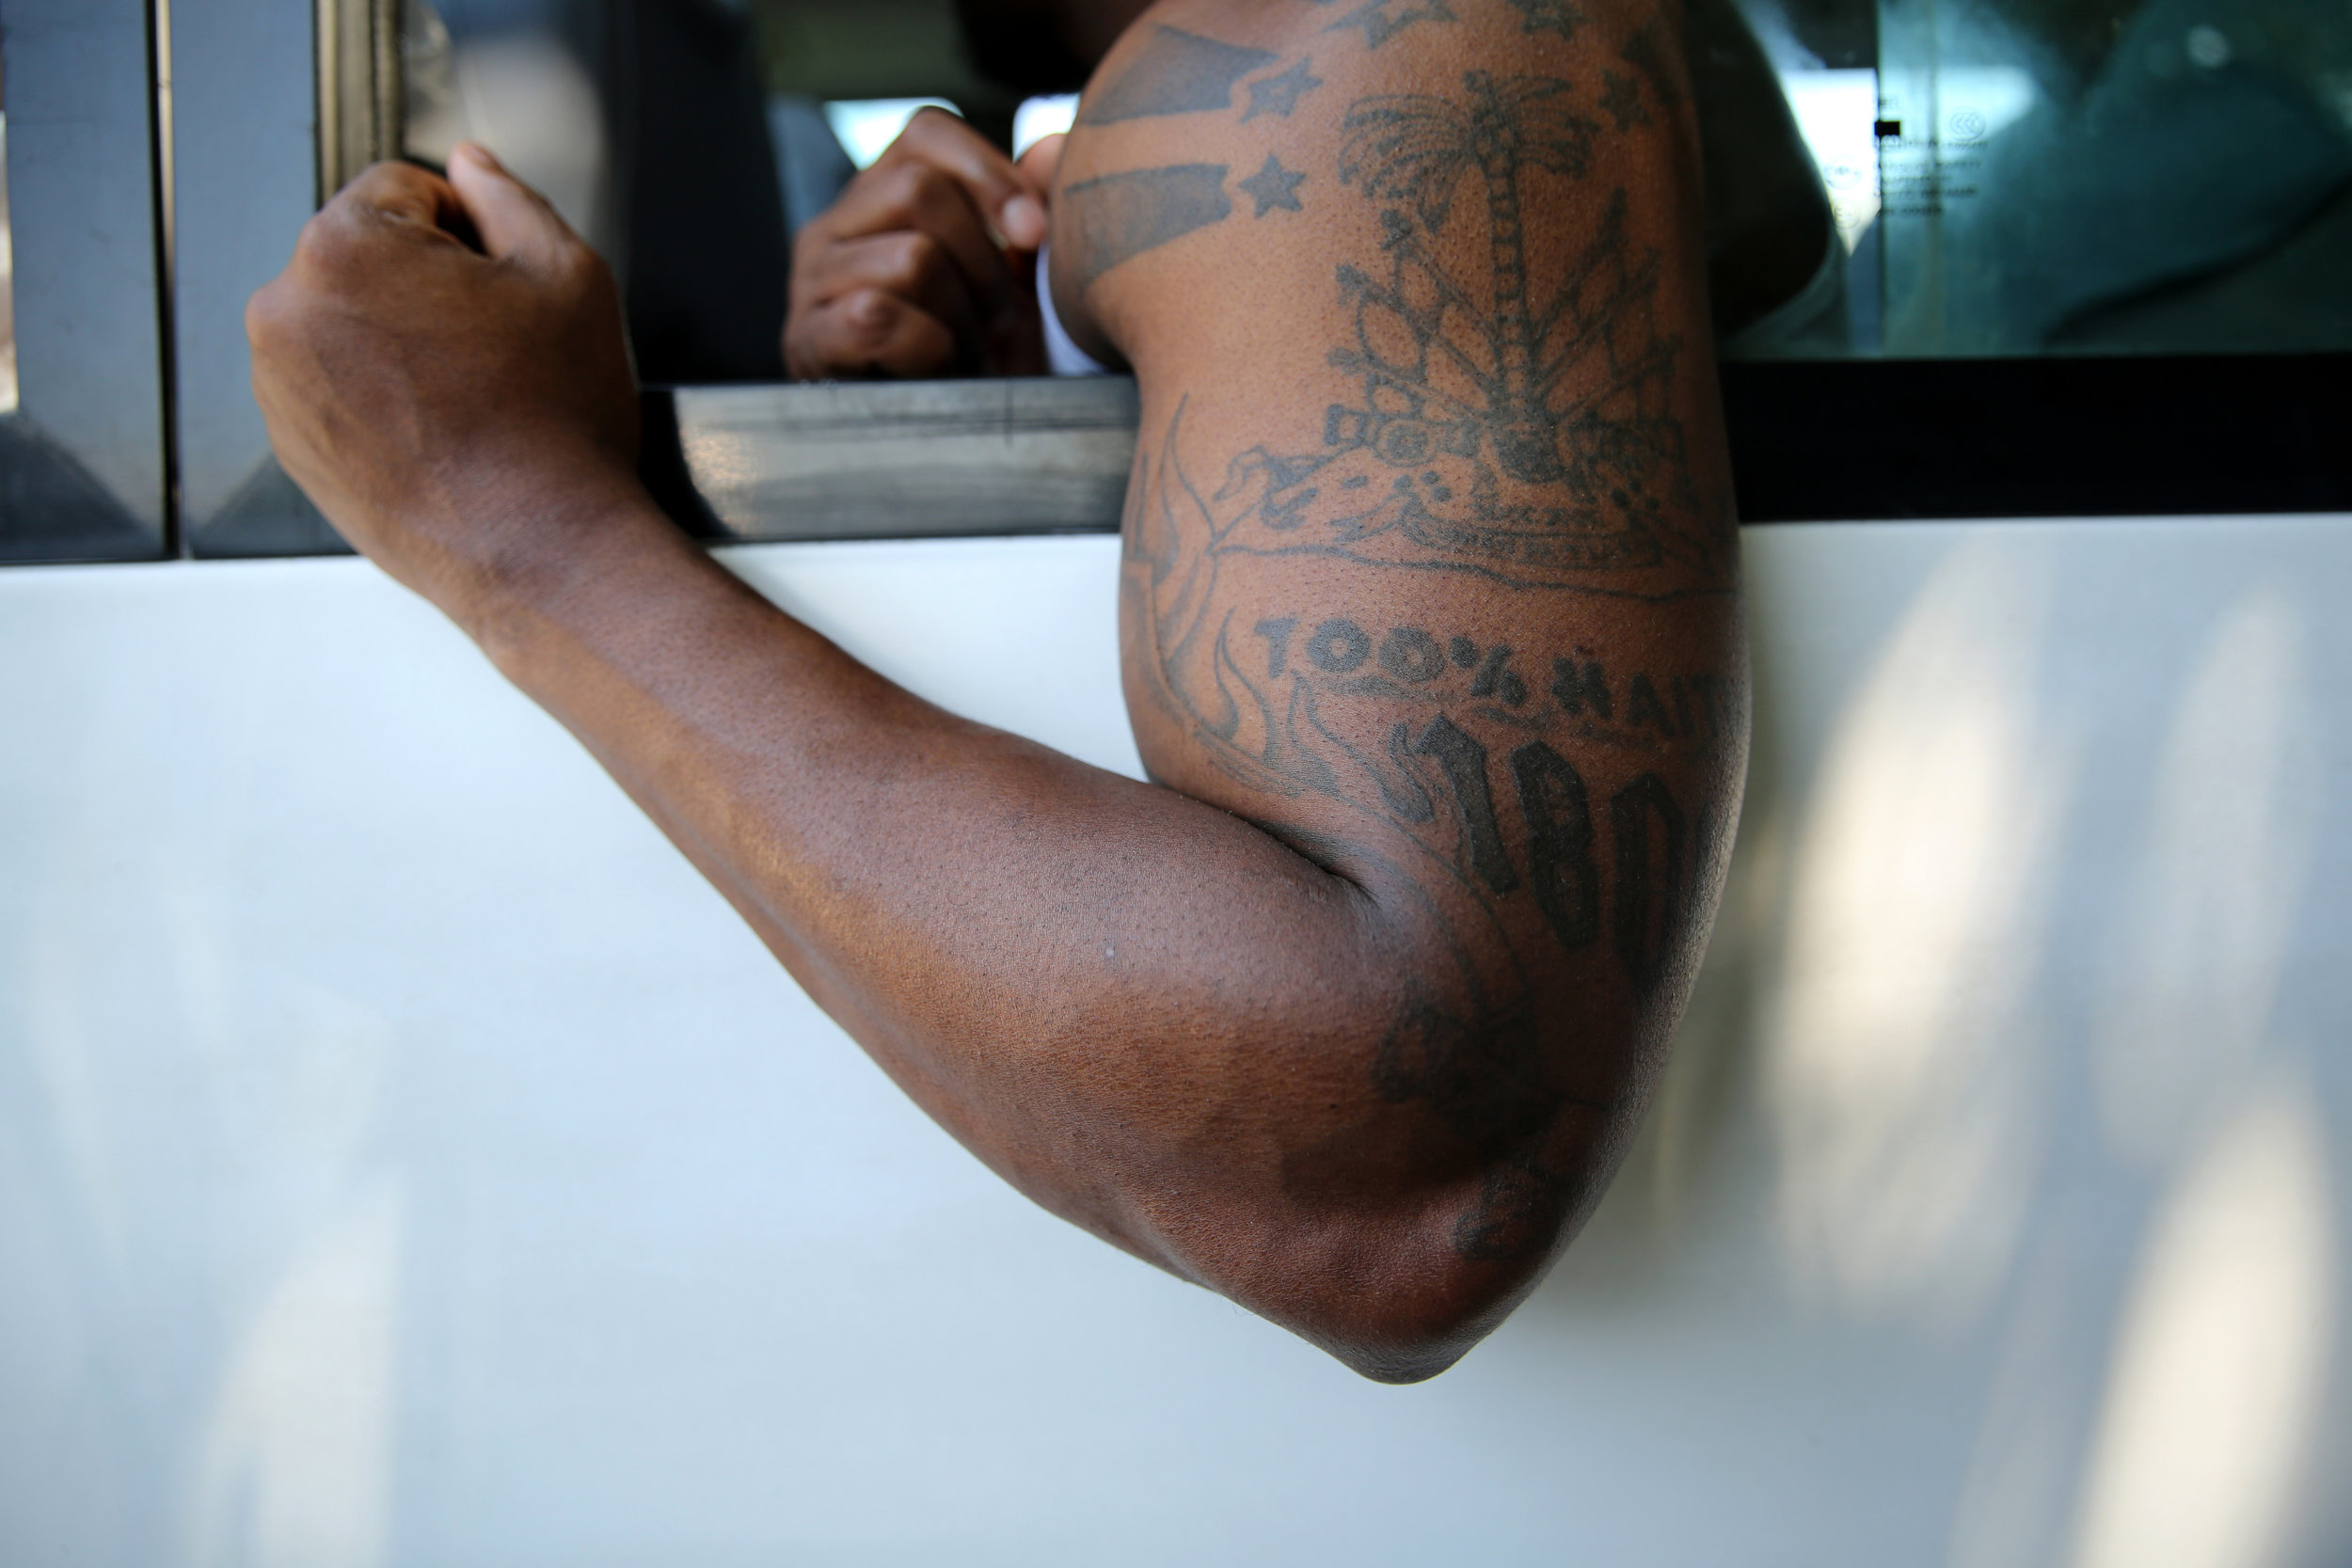   Stevens Arnoux on a bus of Haitian-American deportees arriving at the Toussaint Louverture International Airport in Port-au-Prince in March 2014. He displays his tattoo, which says “100% Haitian 1804.”  